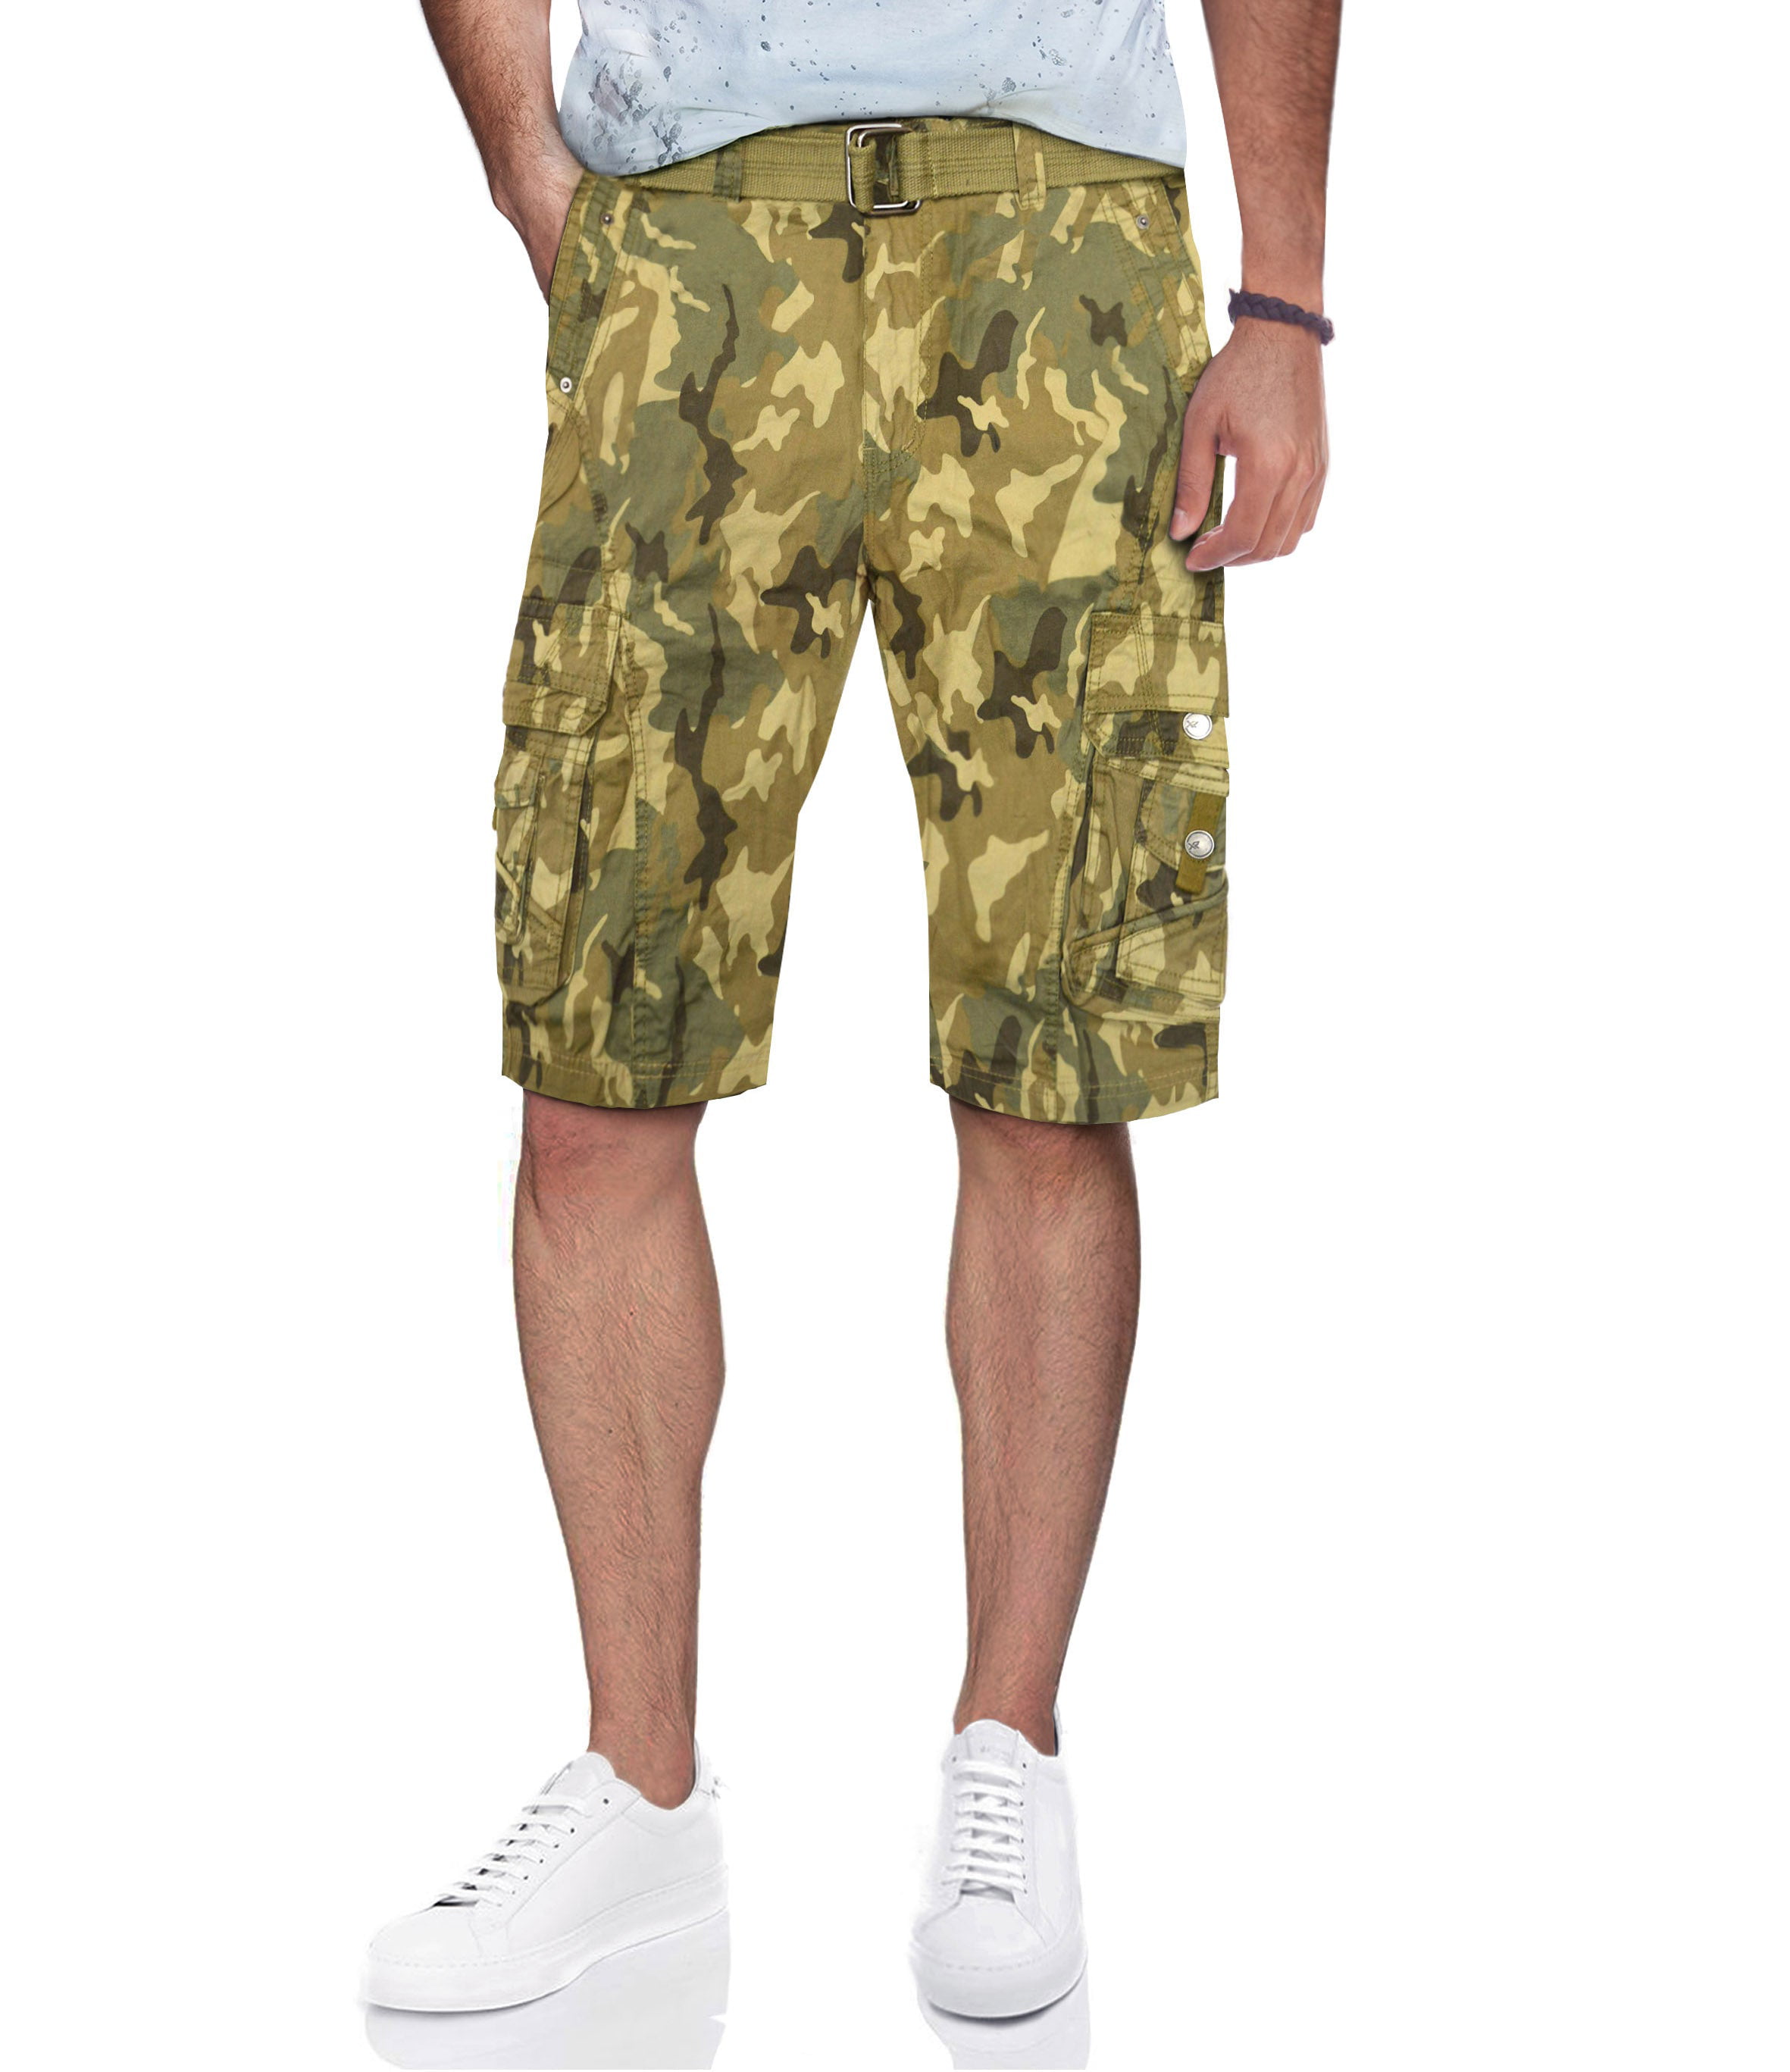 X RAY Mens Tactical Bermuda Cargo Shorts Camo and Solid Colors 12.5 Inseam Knee Length Classic Fit Multi Pocket